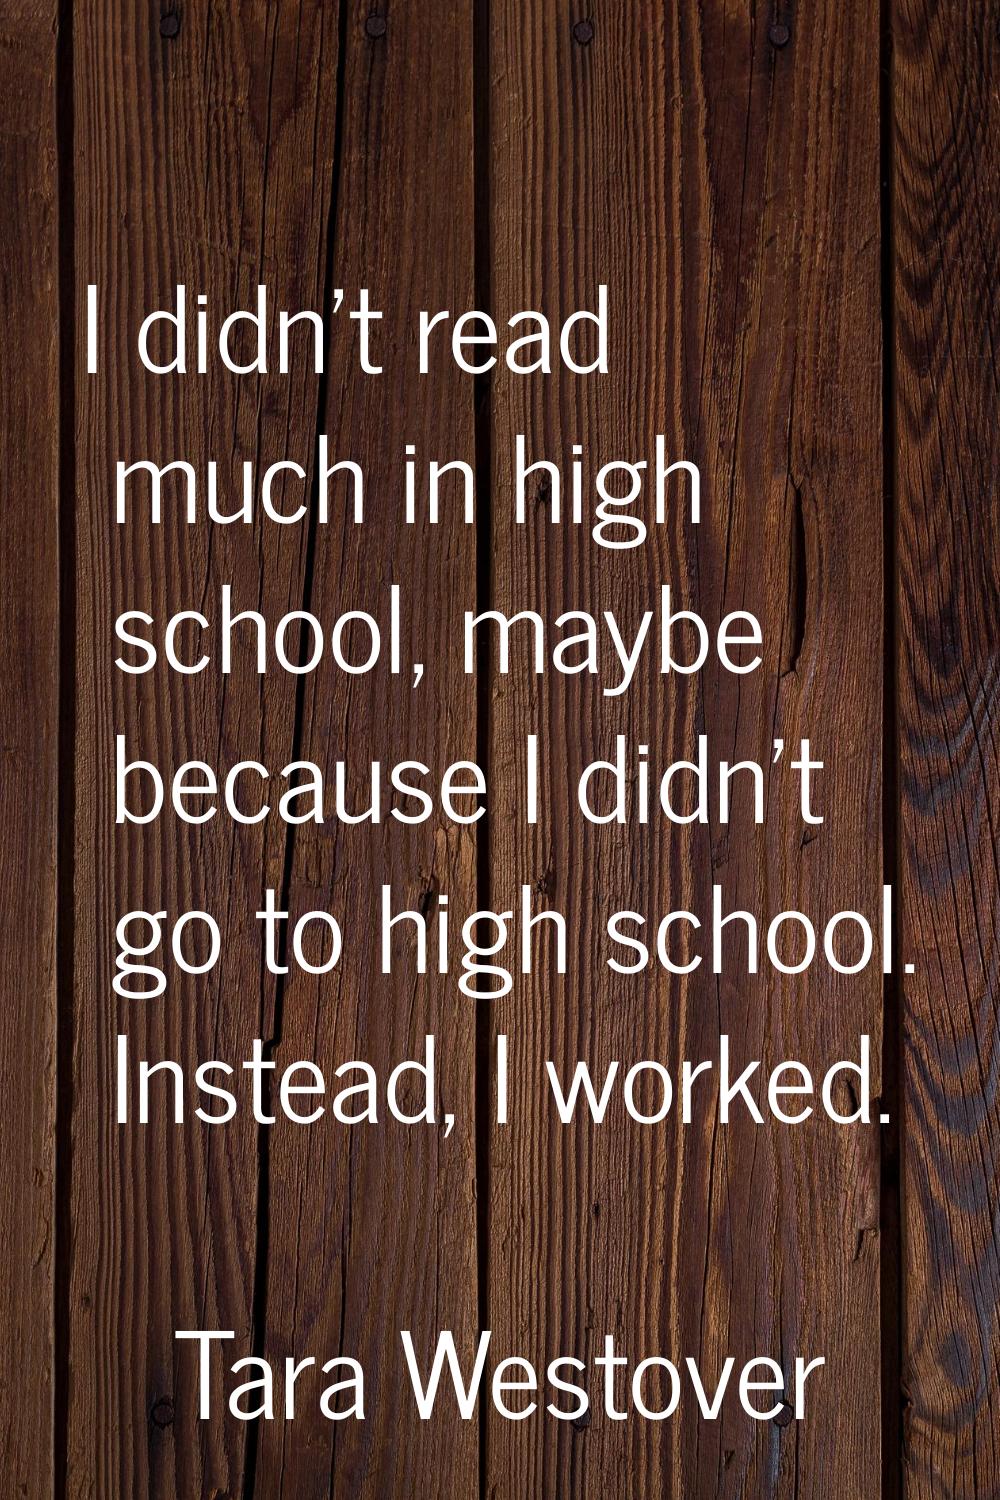 I didn't read much in high school, maybe because I didn't go to high school. Instead, I worked.